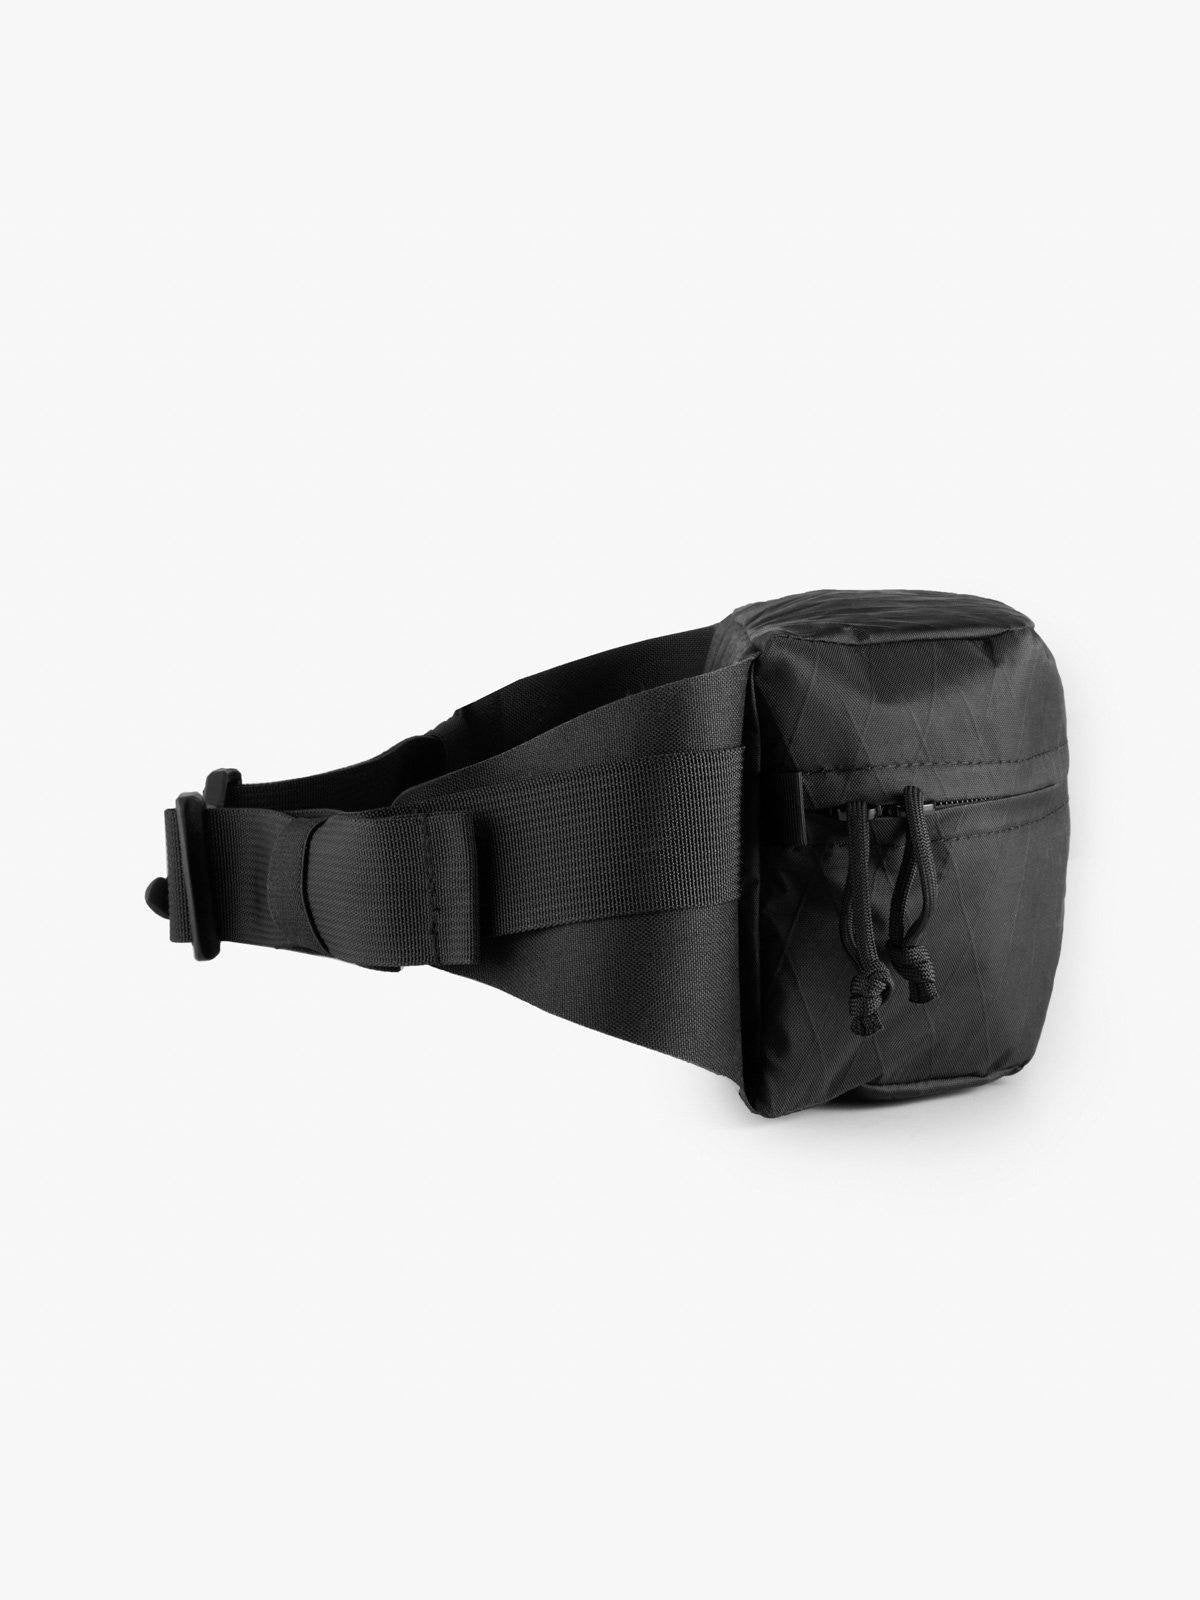 Axis by Mission Workshop - Weatherproof Bags & Technical Apparel - San Francisco & Los Angeles - Built to endure - Guaranteed forever